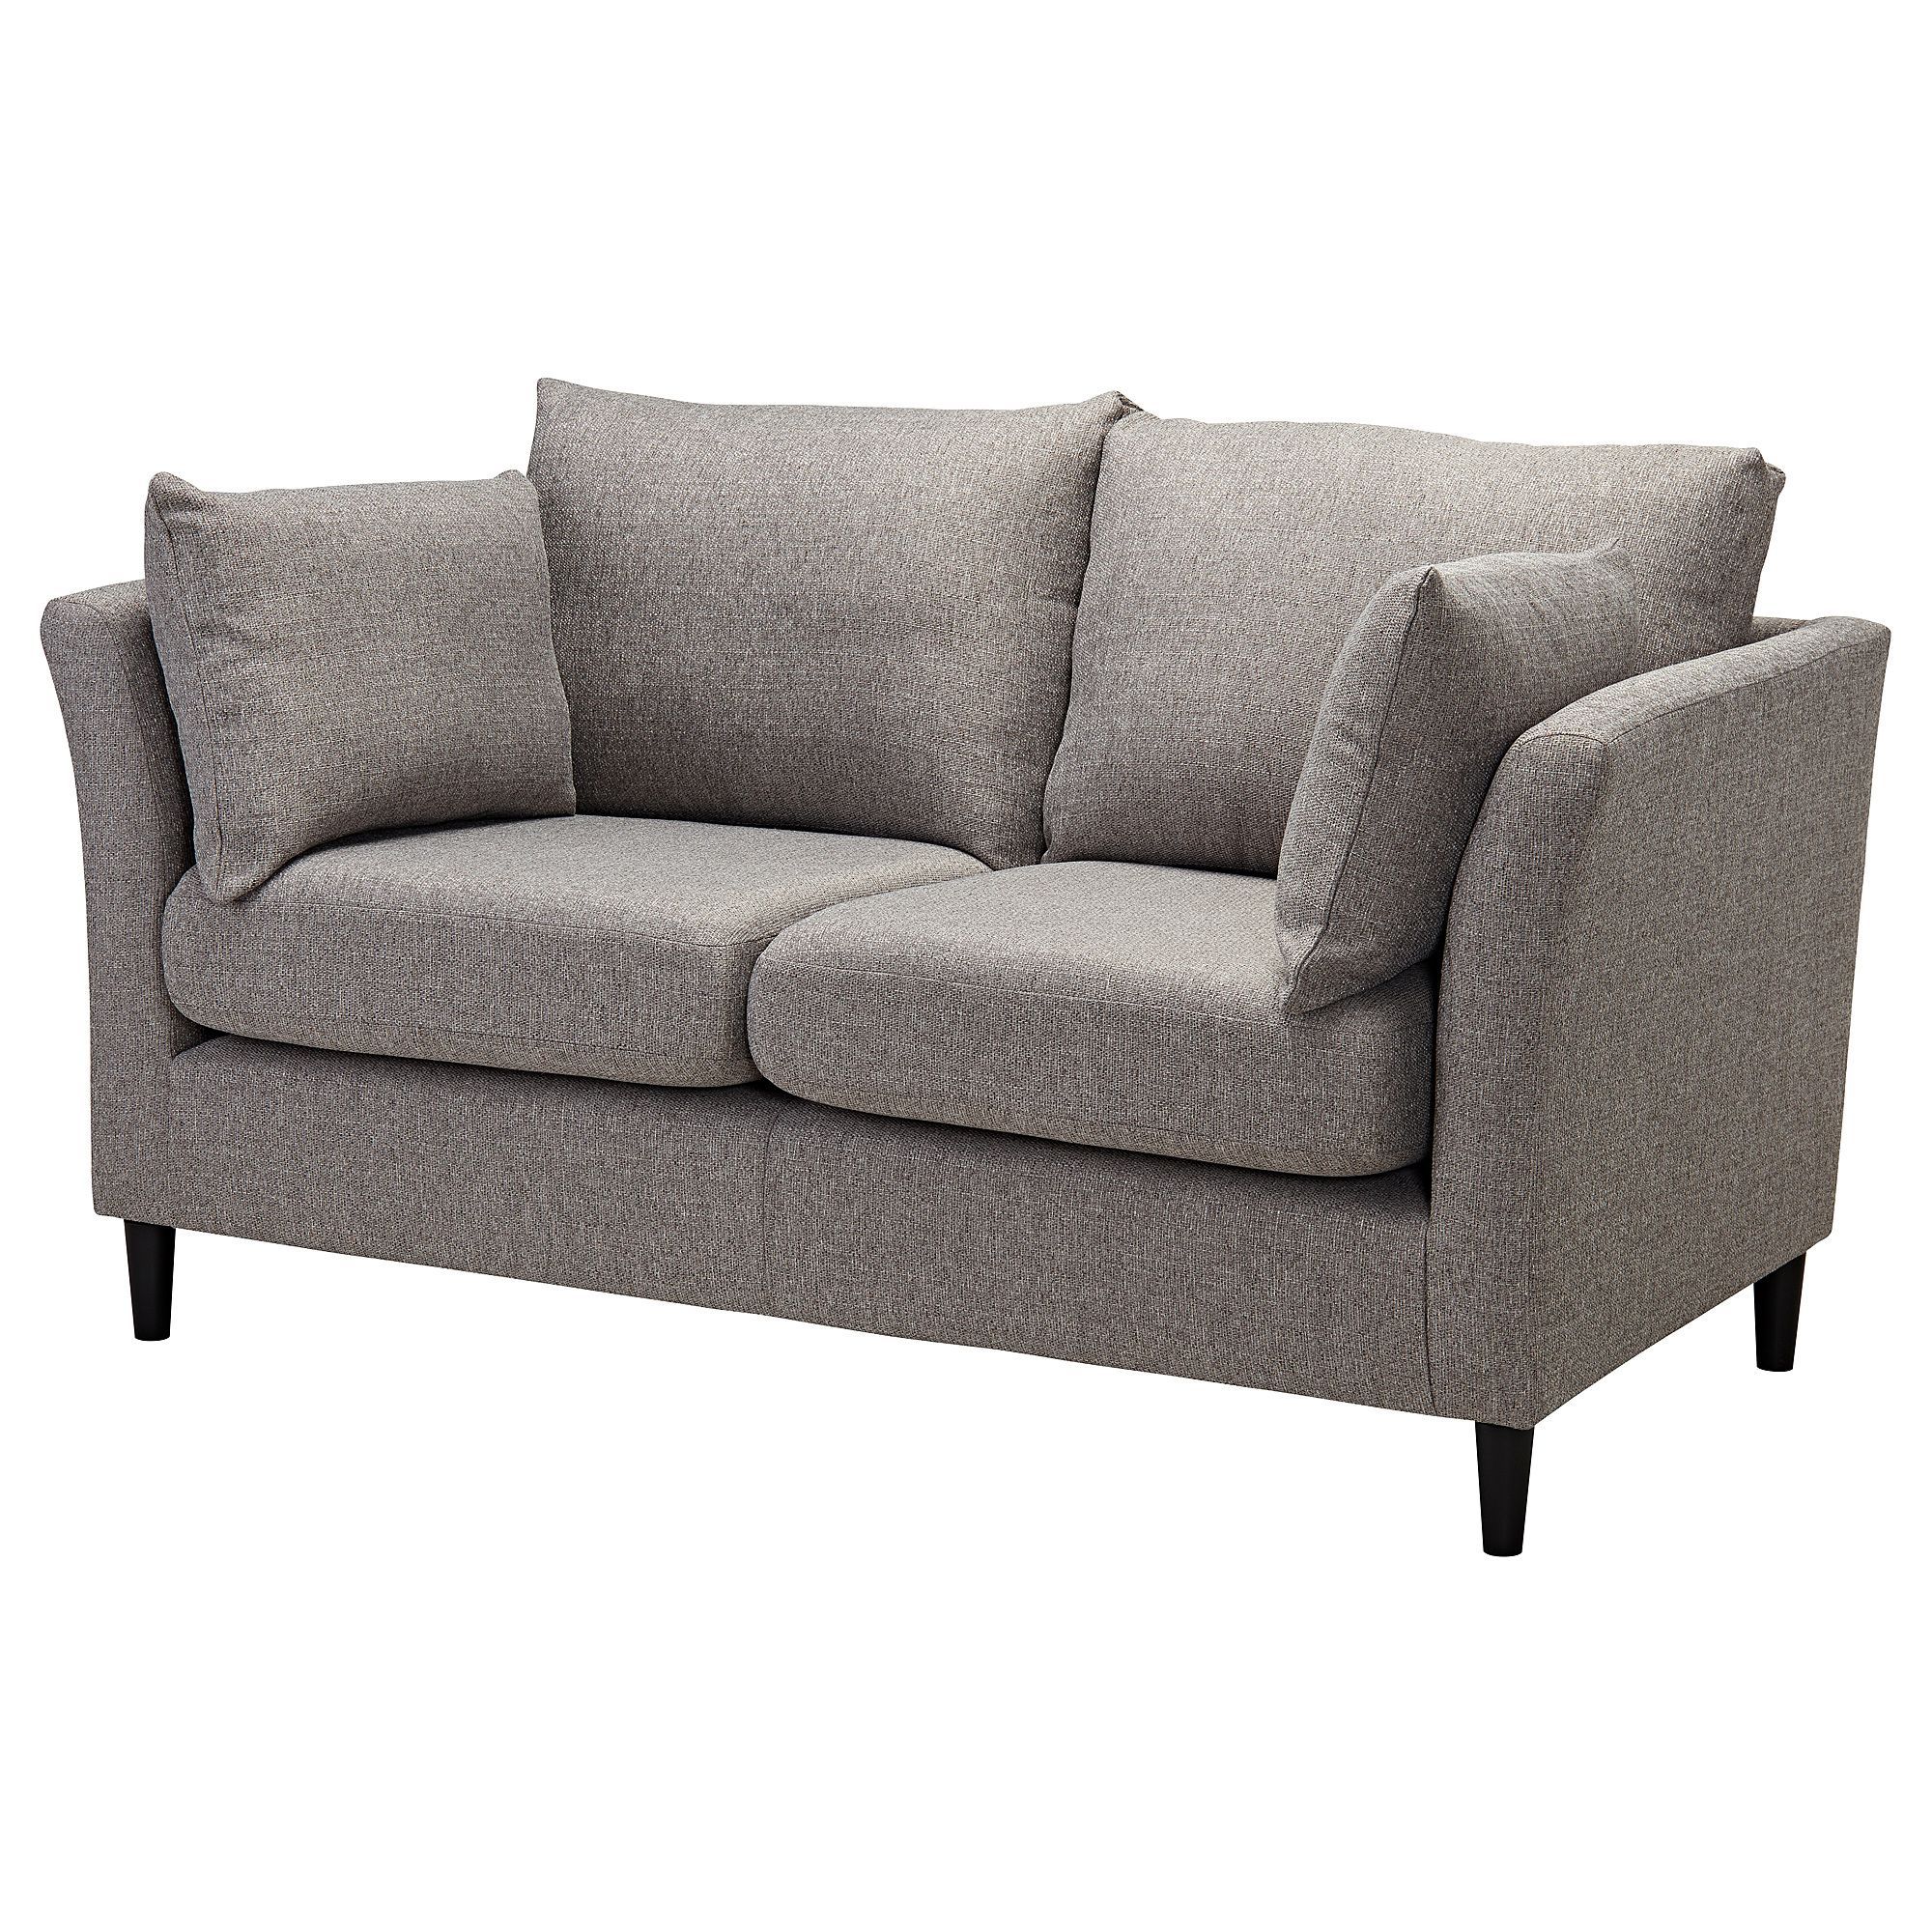 Glorious Grey Two Seater Sofa , Best Grey Two Seater Sofa Intended For Small 2 Seater Sofas (View 4 of 15)